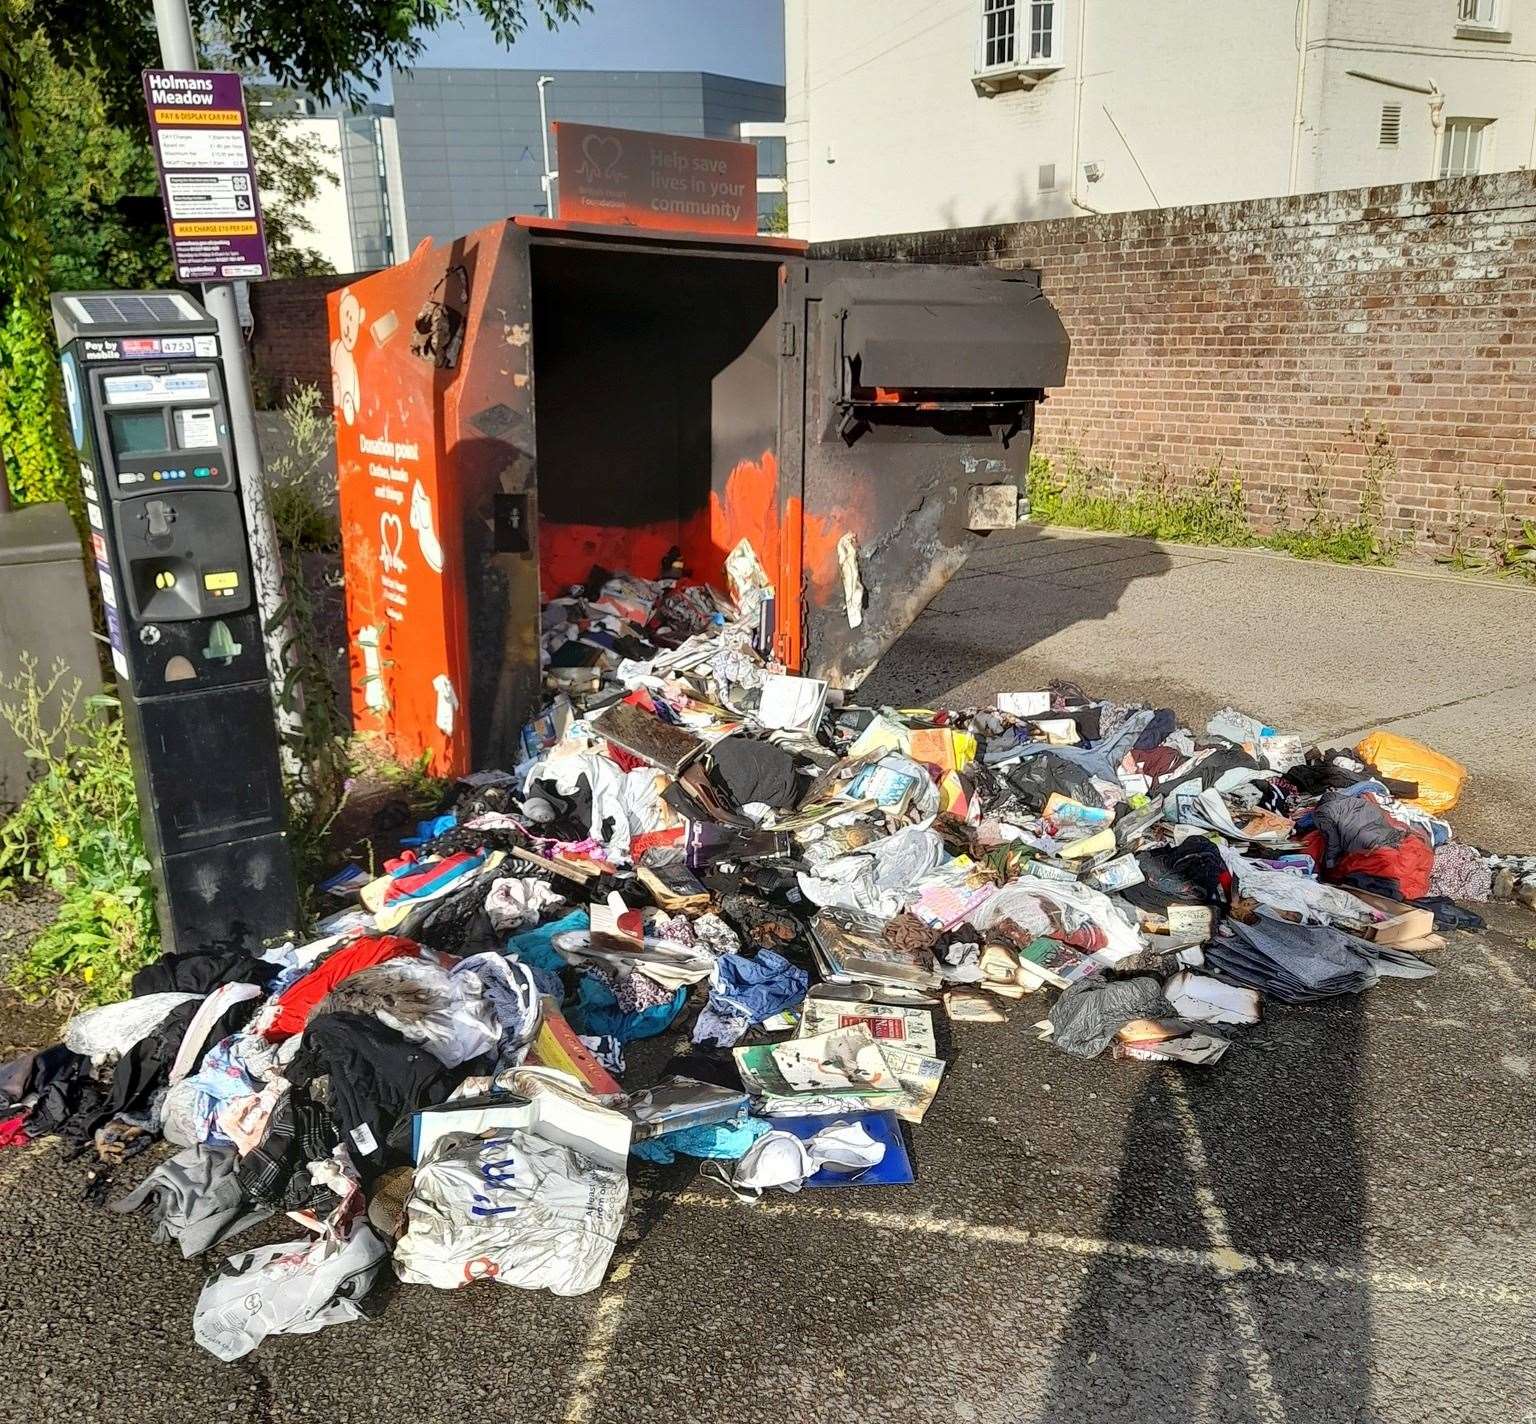 The blaze was started in the British Heart Foundation donation bin. Picture: Iain Goodall